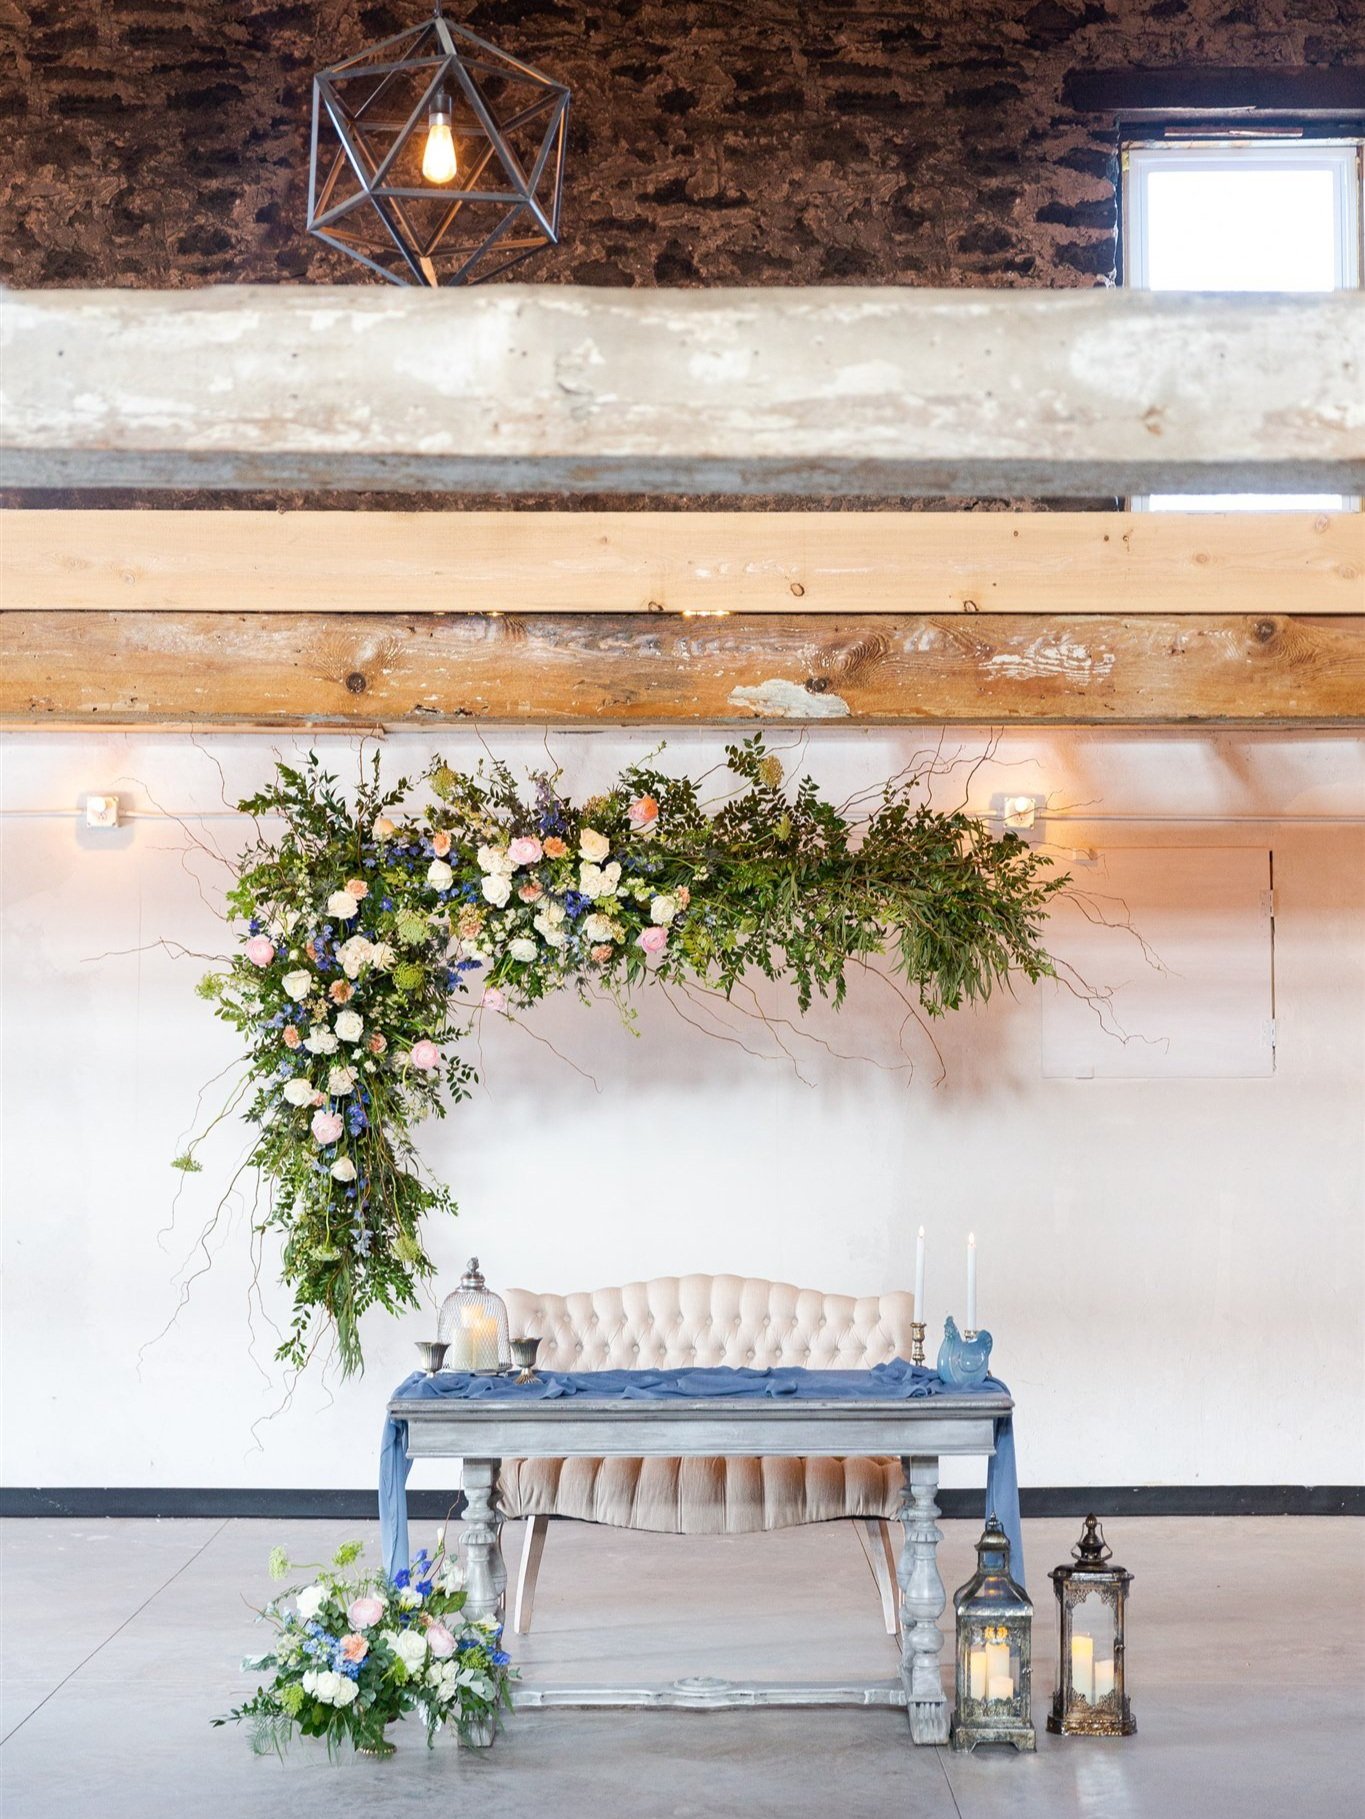 Natural Wood Tabletop Easel – Something Borrowed Event Rentals